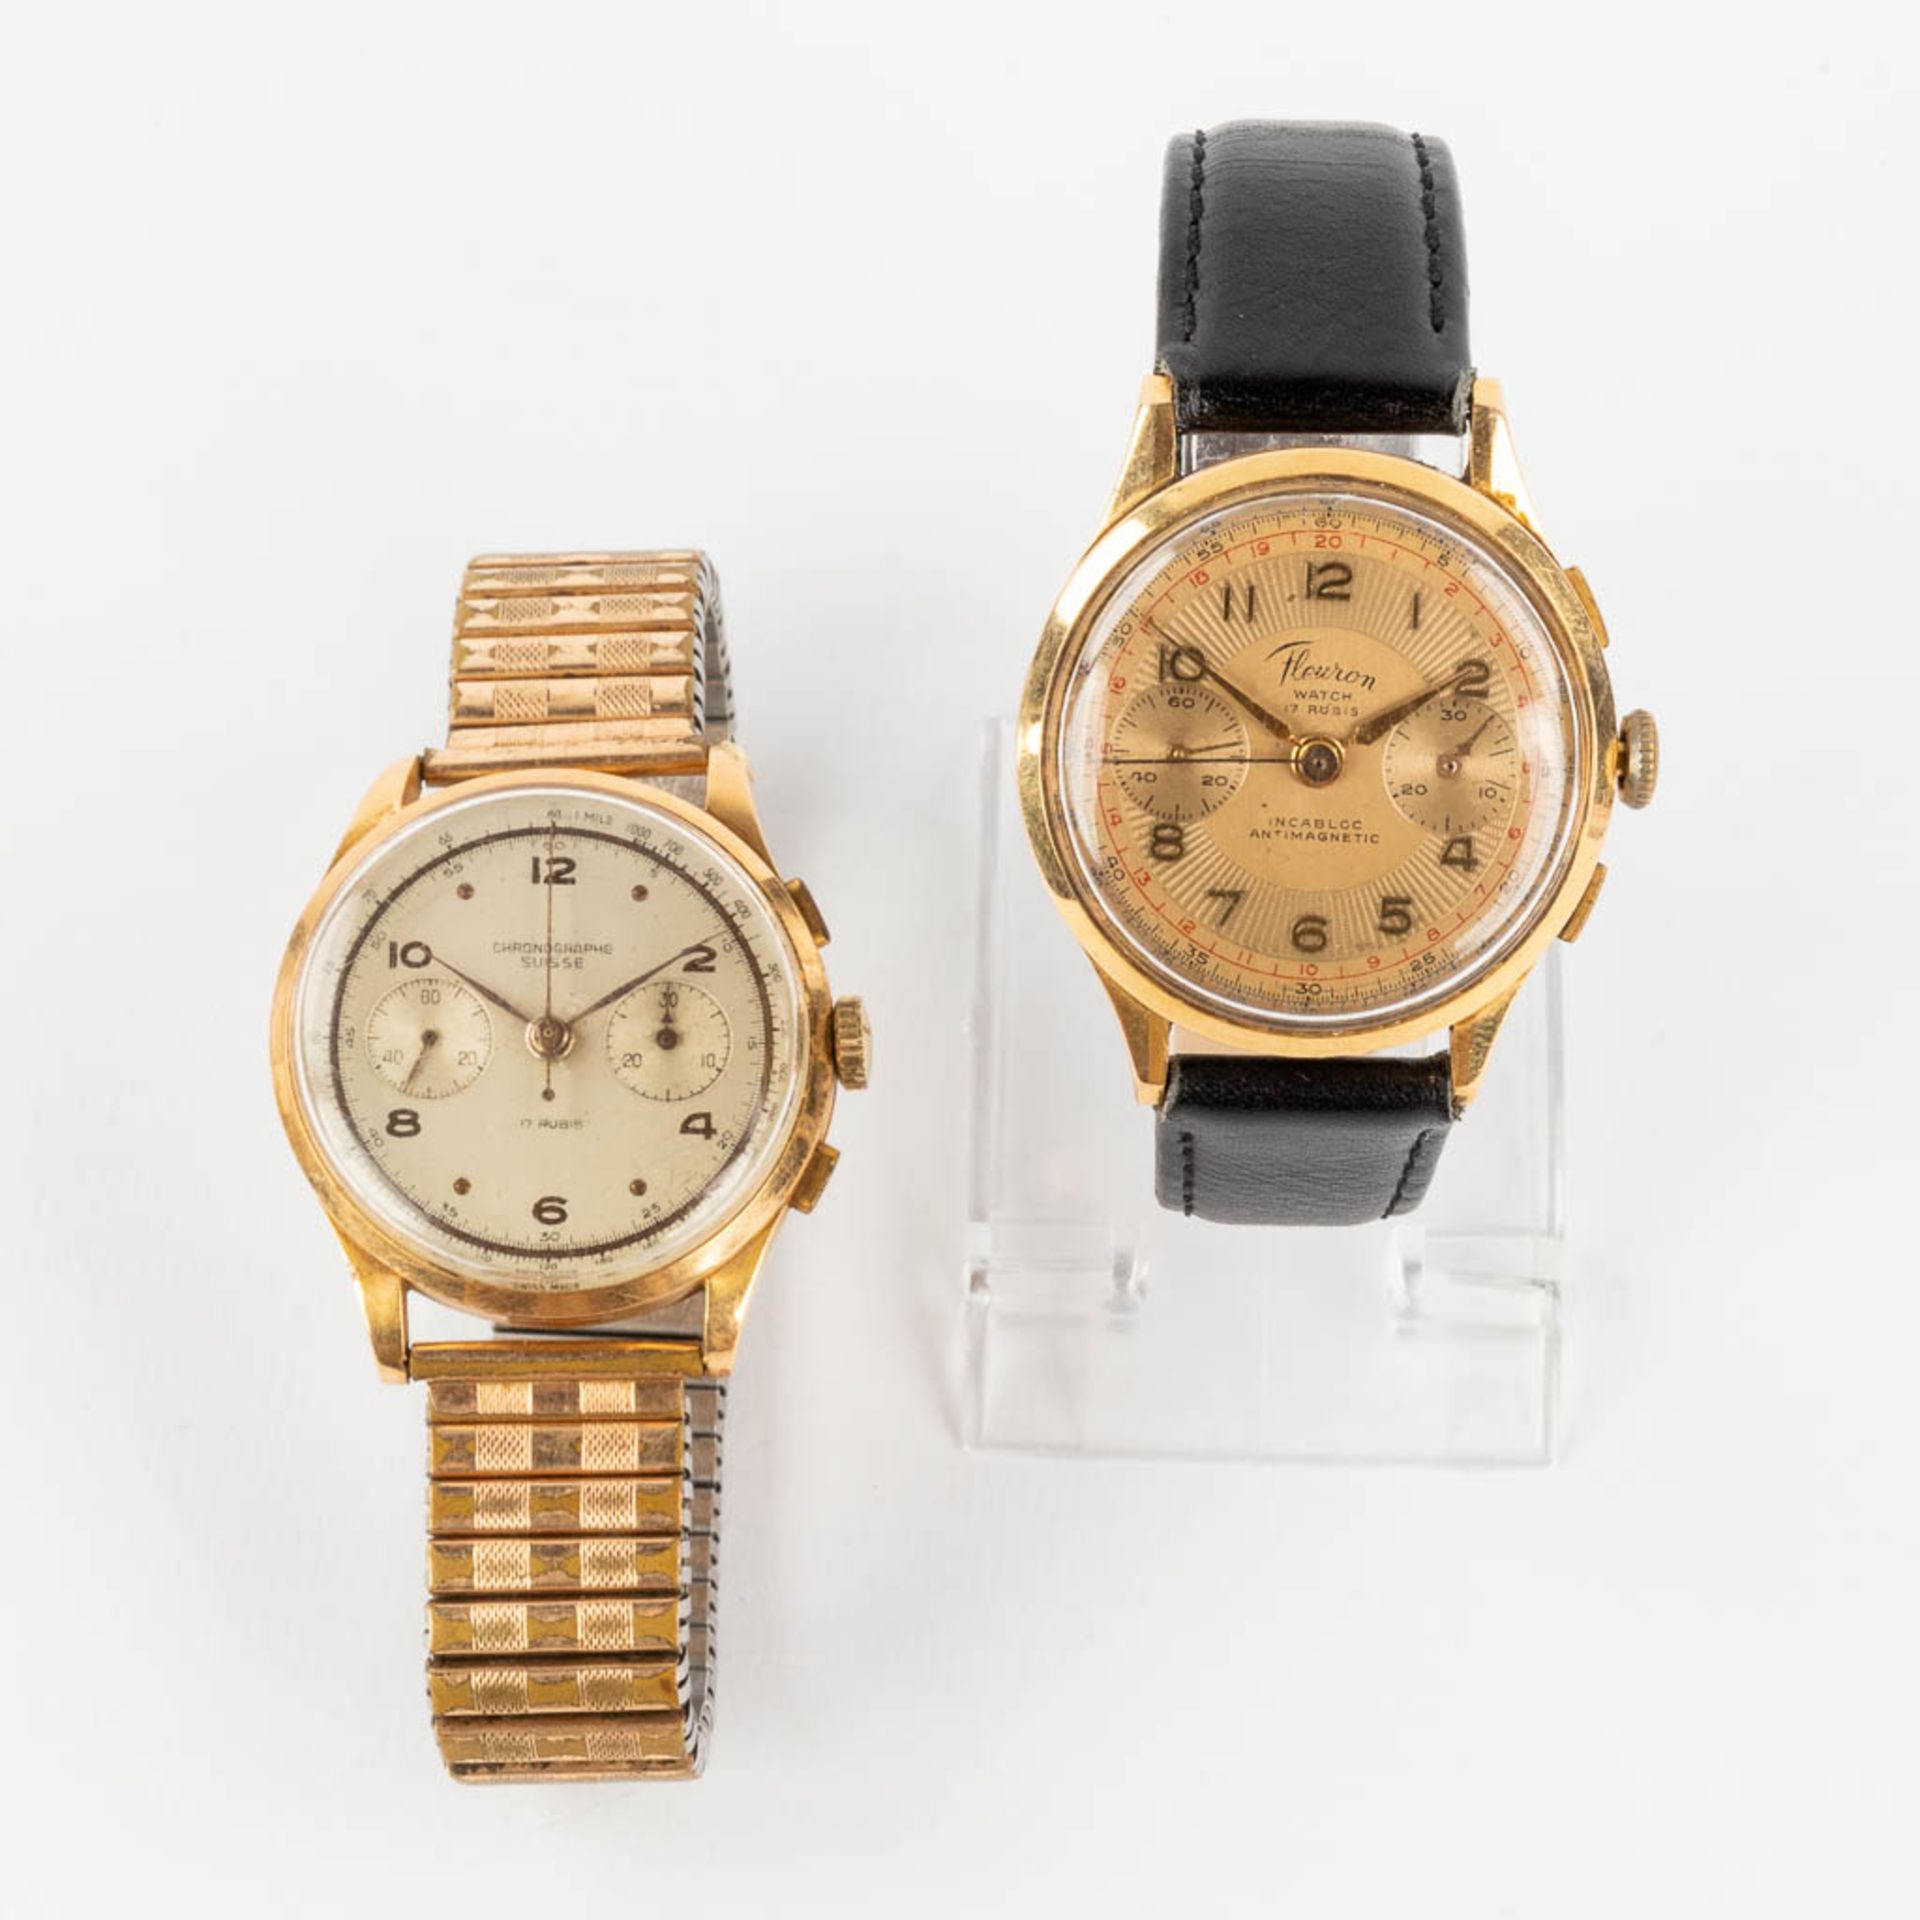 A collection of 2 wristwatches 'Fleuron' and 'Chronographe suisse', 18kt gold. (3,8cm)